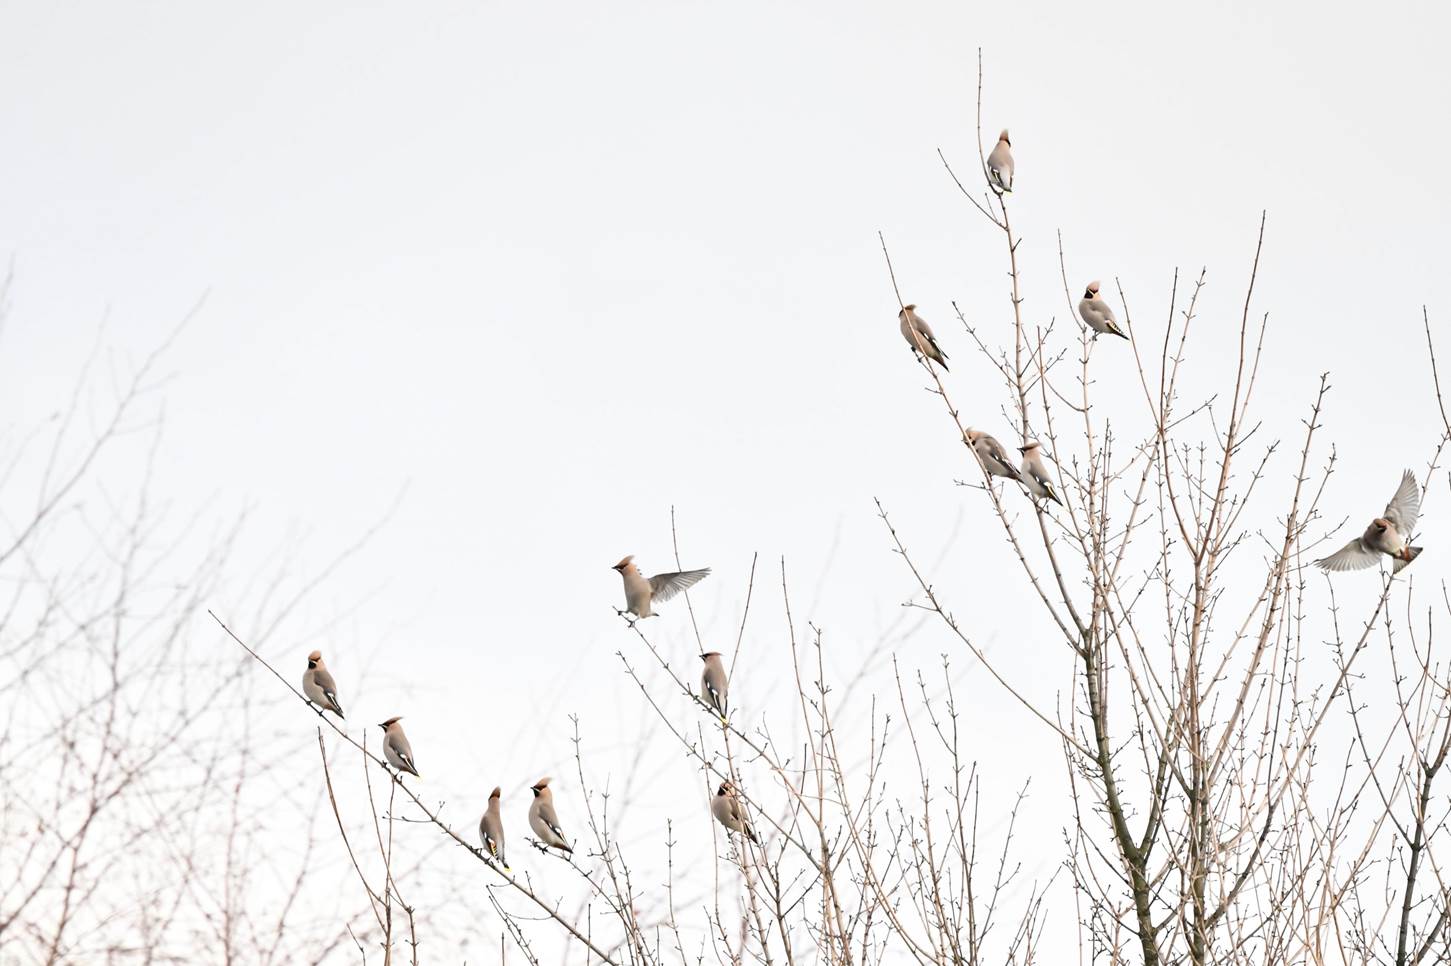 A group of birds sitting on a tree branch

Description automatically generated